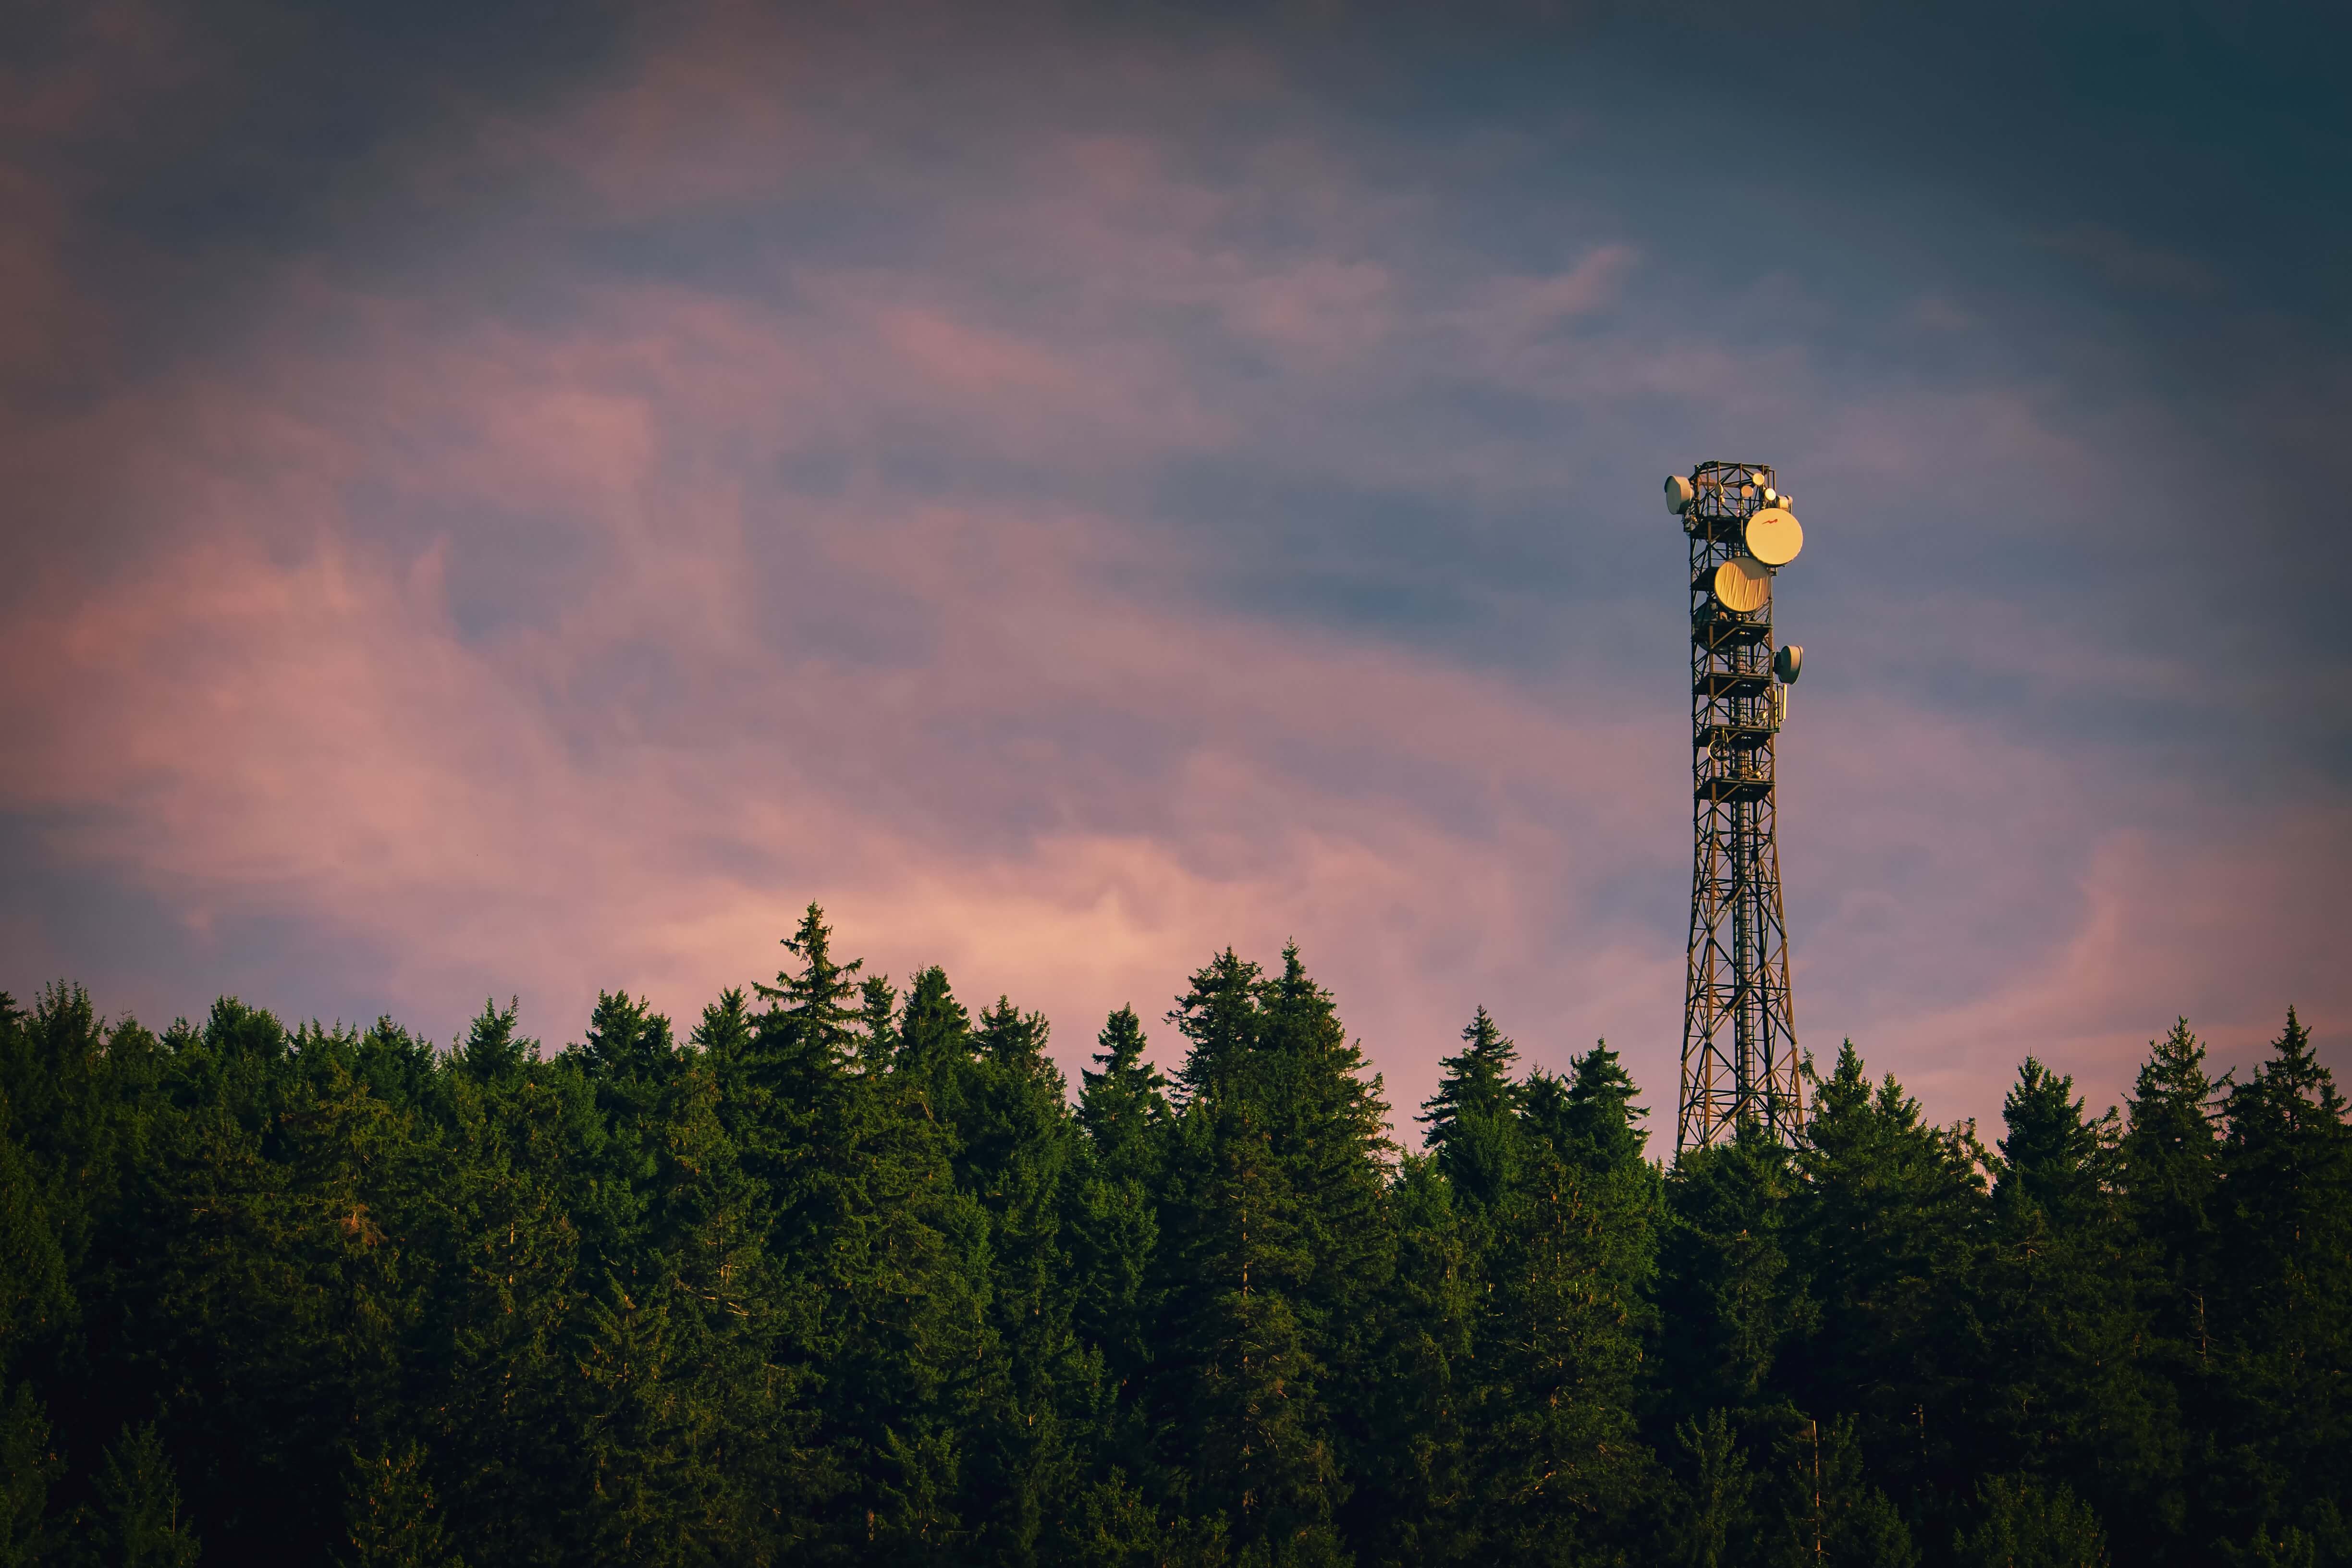 A radio tower in Hornisgrinde, Germany. © Couleur/Pixabay